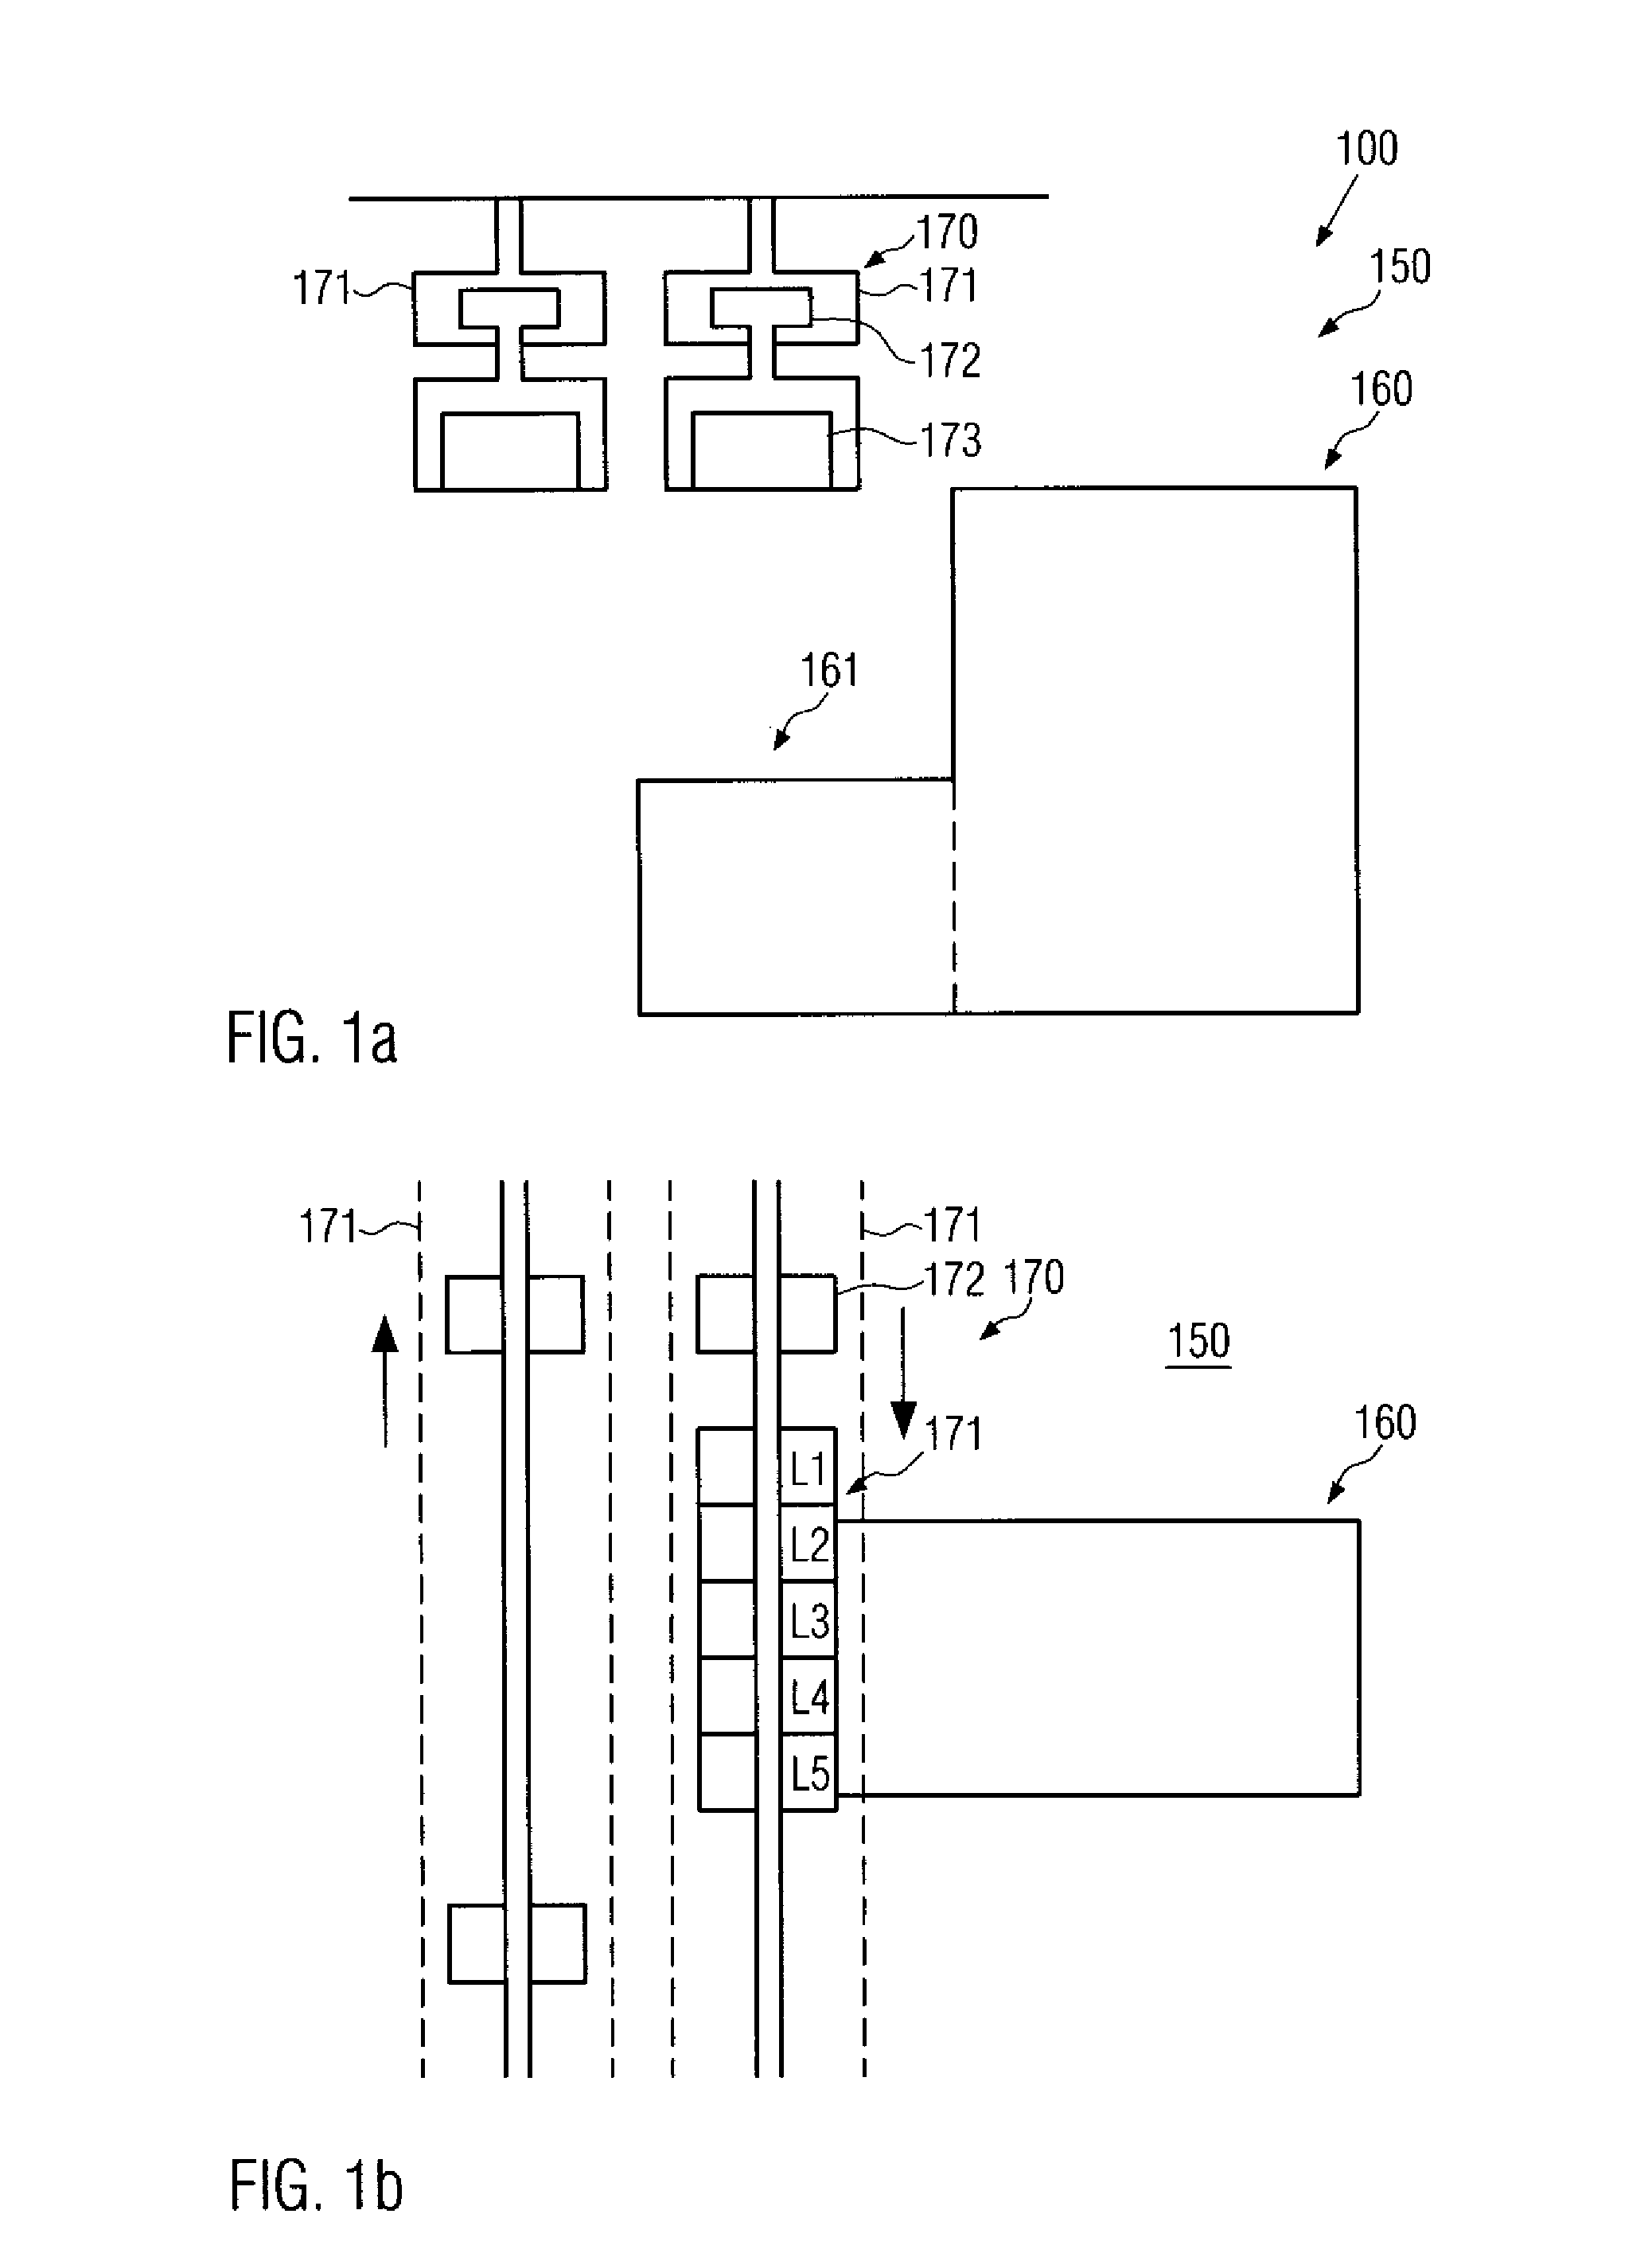 Method and system for locally buffering substrate carriers in an overhead transport system for enhancing input/output capabilities of process tools